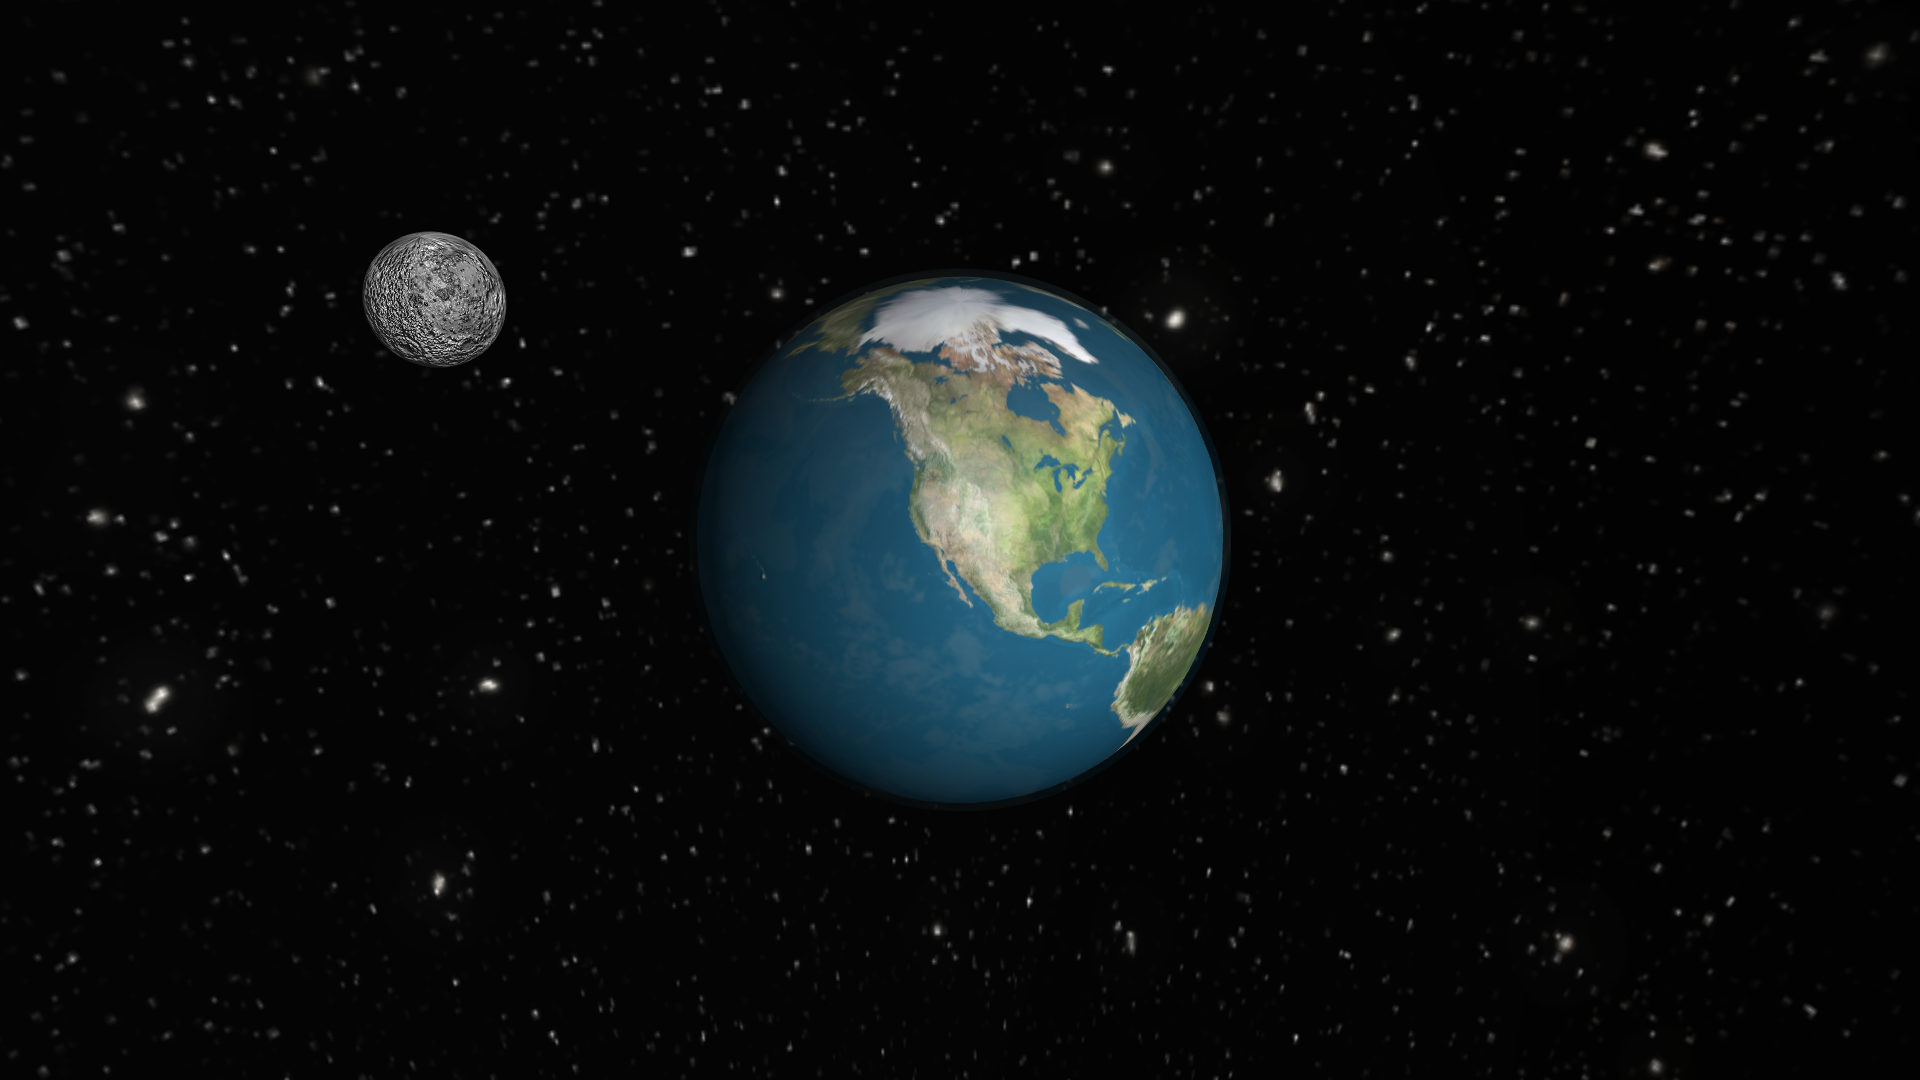 3d image of Earth-Moon system